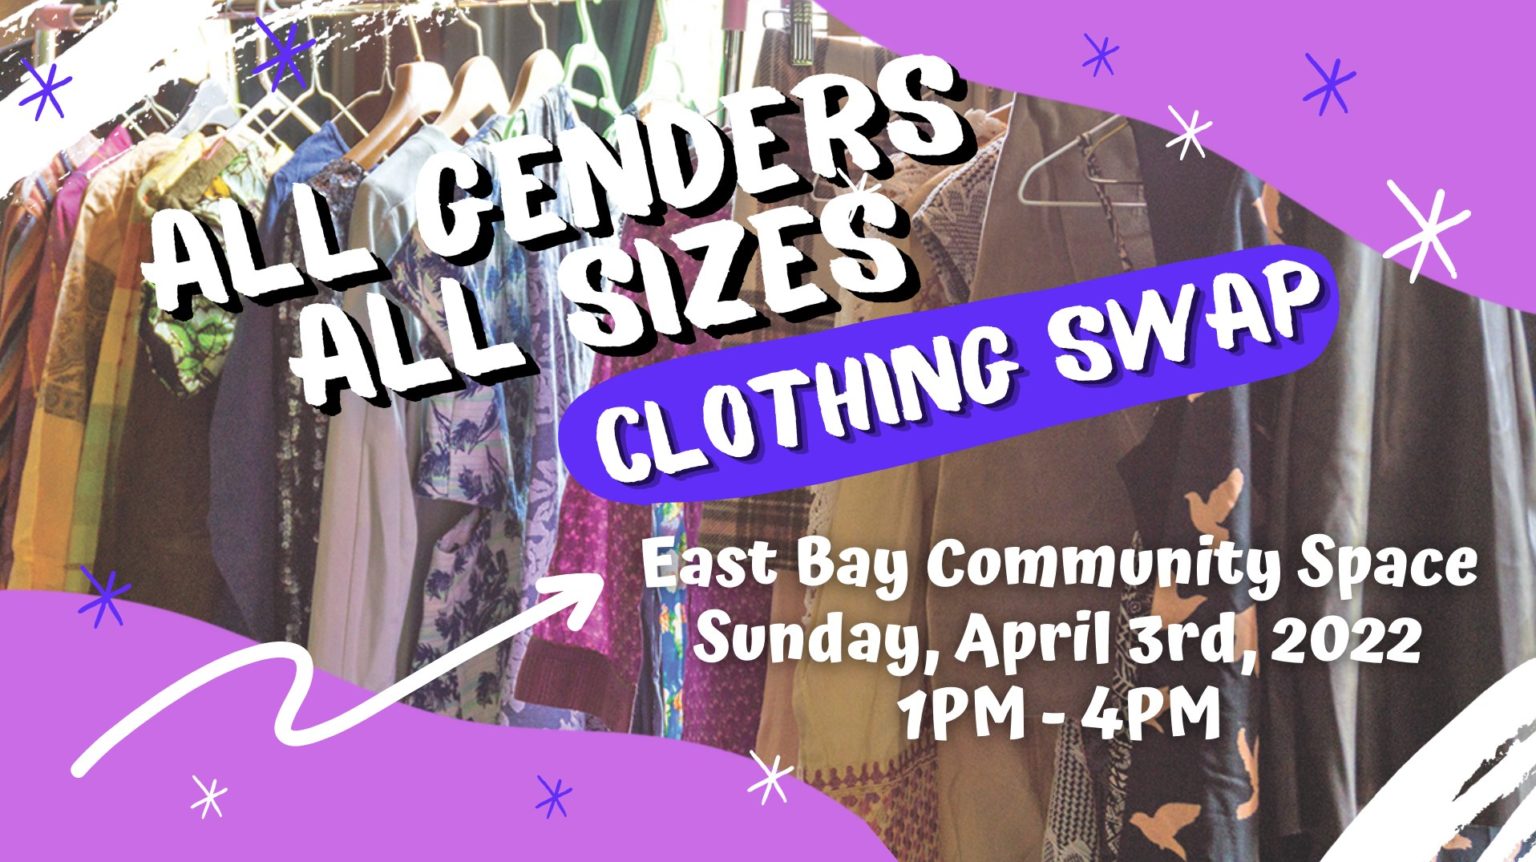 👗👙 👔 👕ALL GENDERS, ALL SIZES CLOTHING SWAP 🧥👚👕👖 – East Bay Community Space